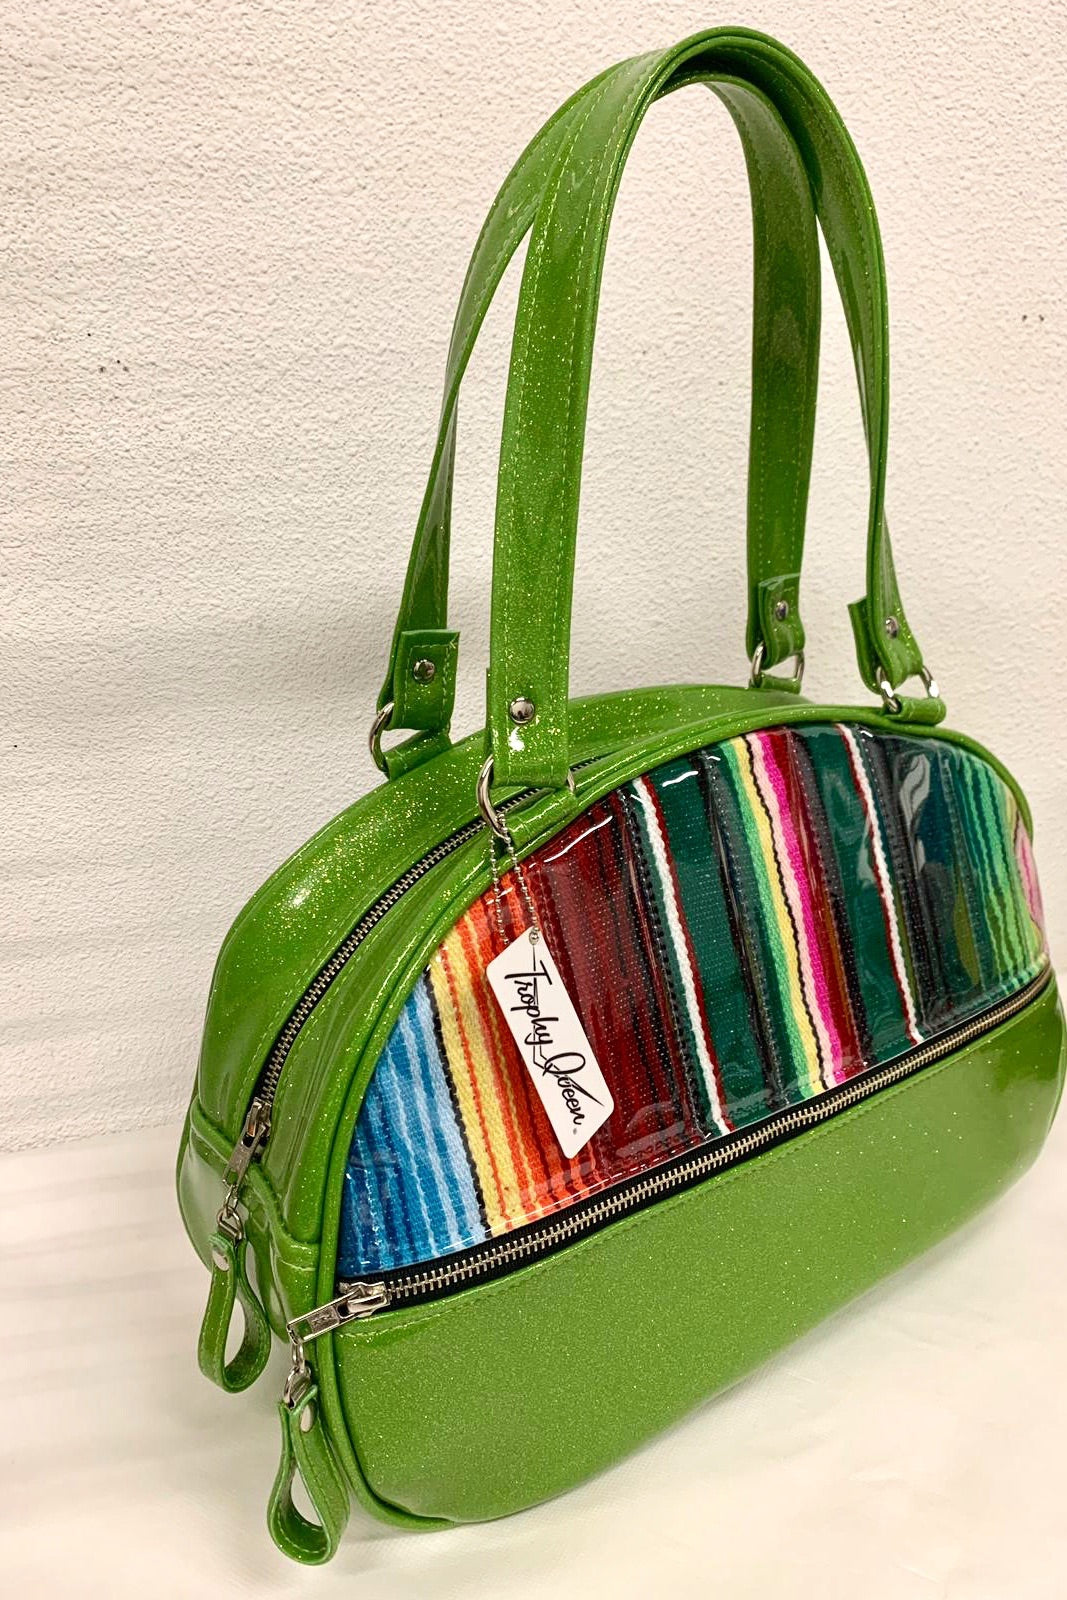 Lucky Strike Bowling Style Bag - Mexican Blanket / Lime Green Glitter Vinyl - Leopard Lining